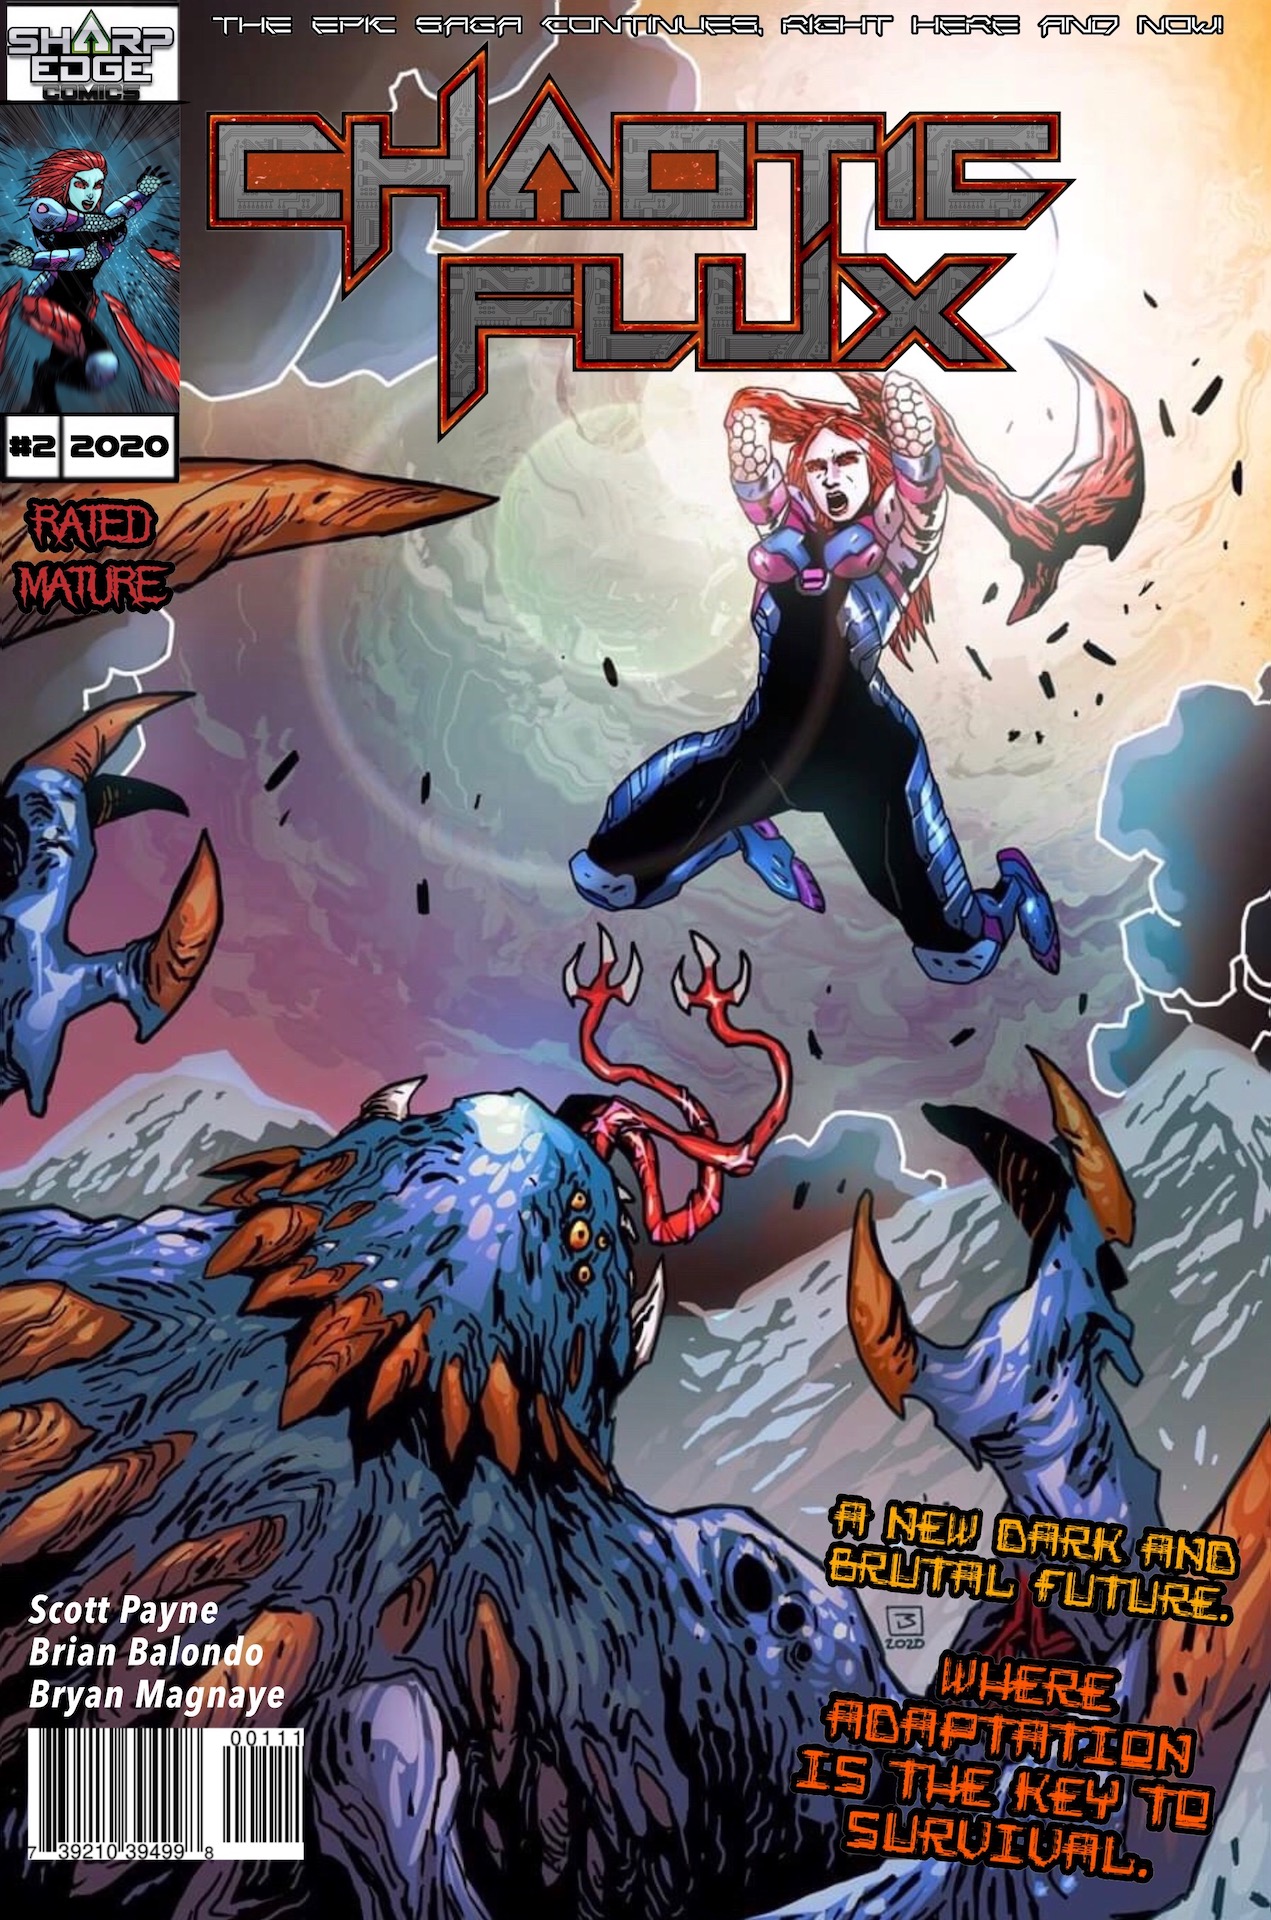 Chaotic Flux issue 2: Aliens vs Monsters part 2